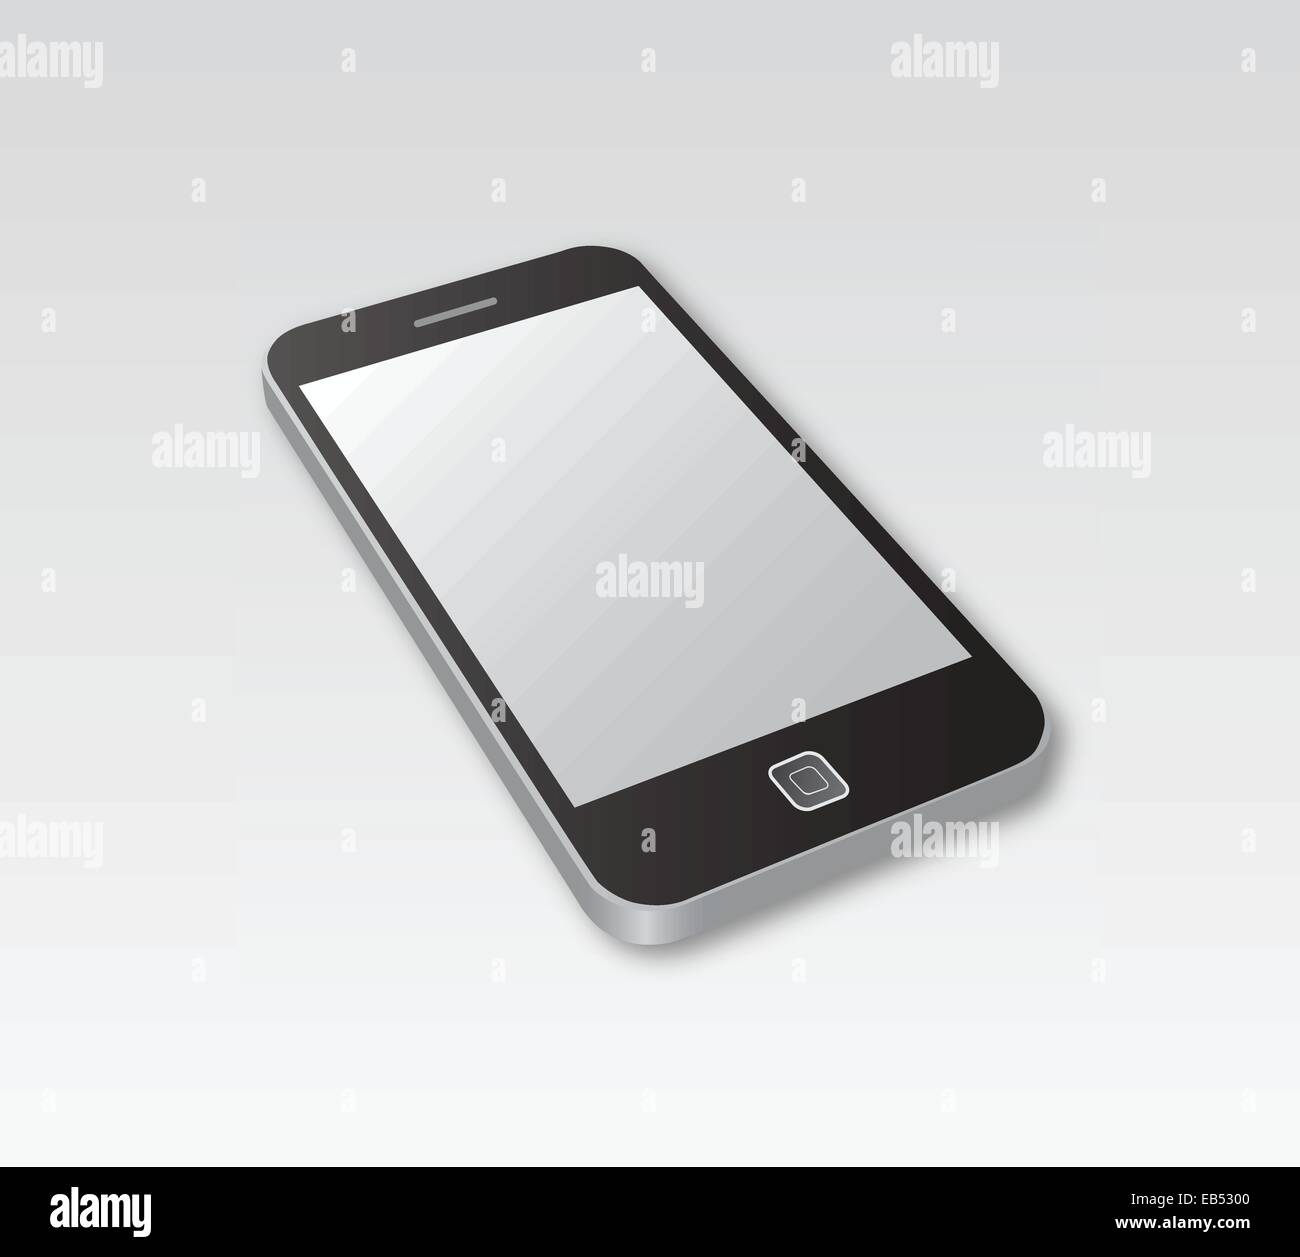 Smartphone lying on grey surface Stock Vector